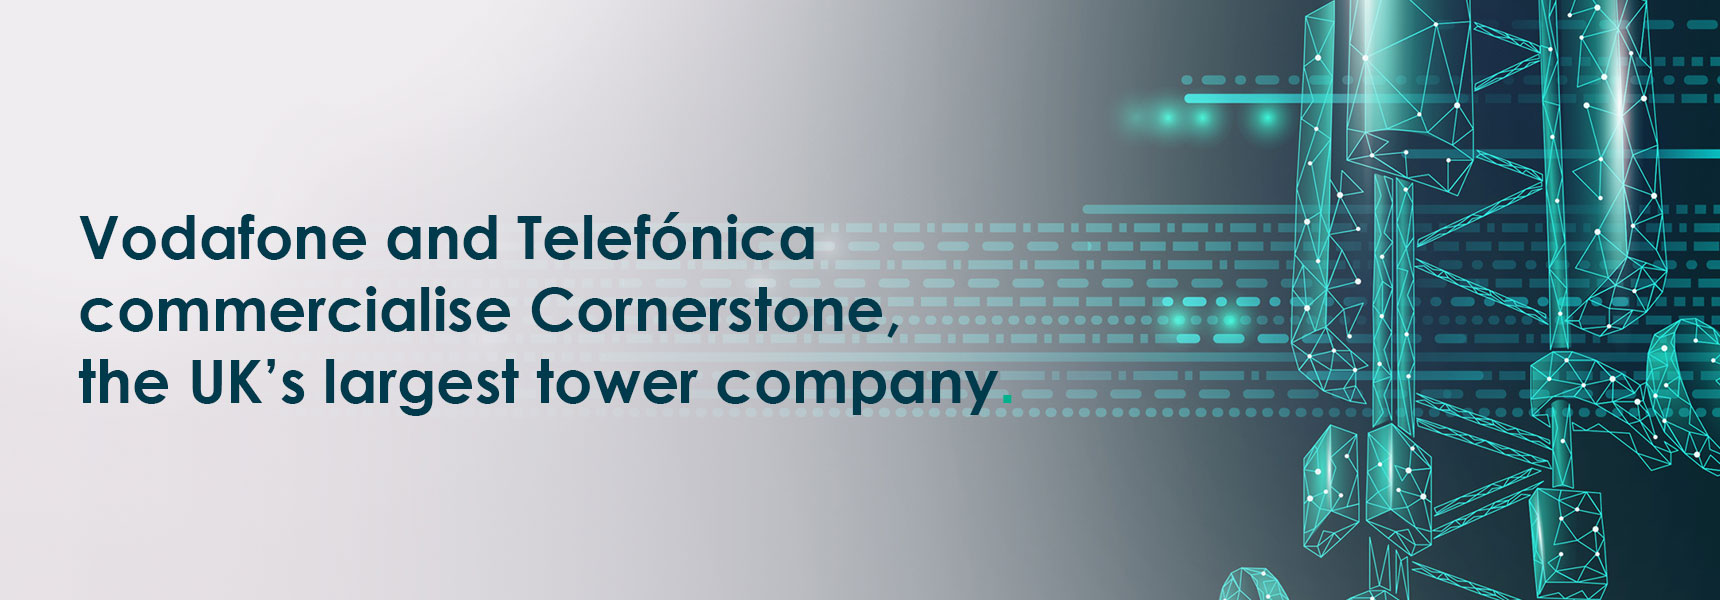 Vodafone and Telefónica commercialise Cornerstone, the UK’s largest tower company